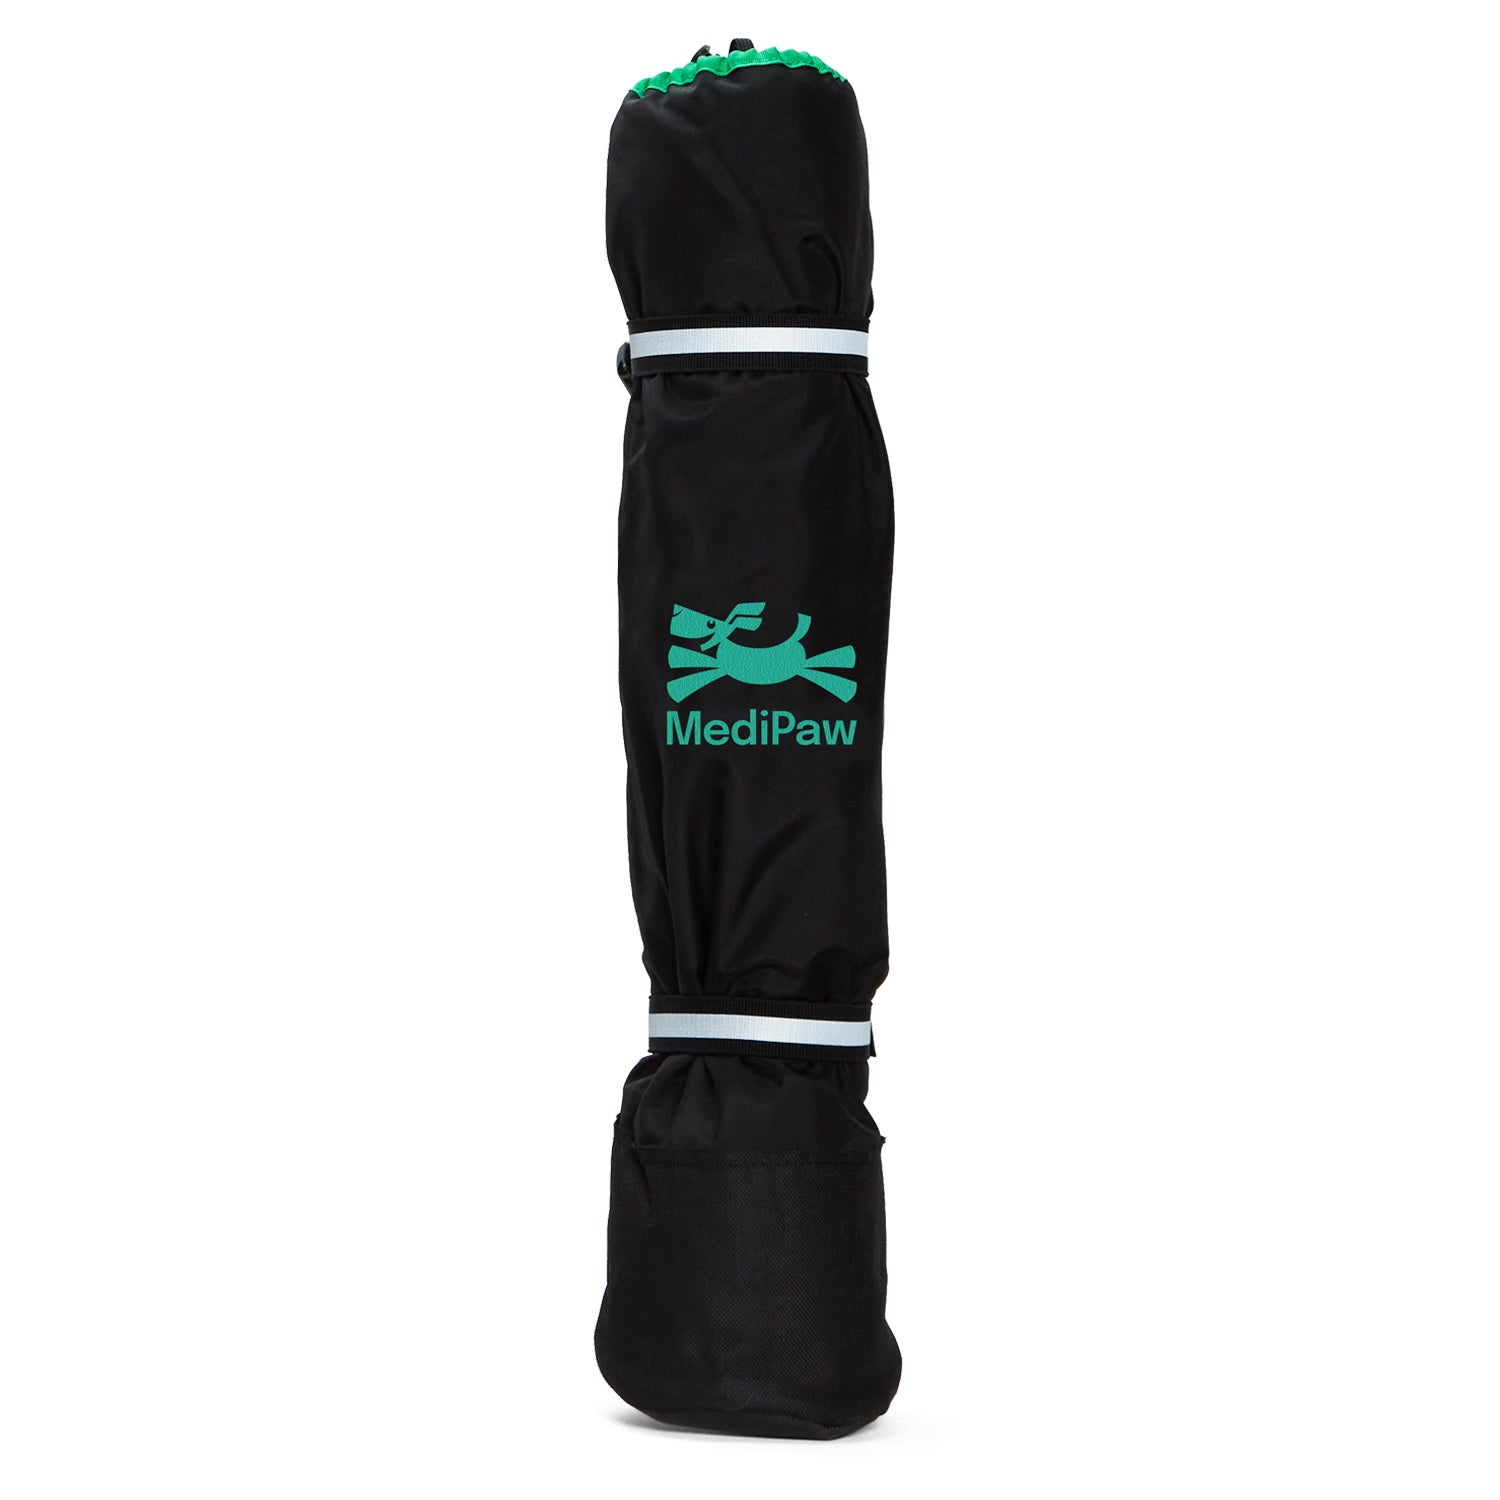 A black bag with a green logo of MediPaw: Healing Slim Boot by Your Whole Dog on it.